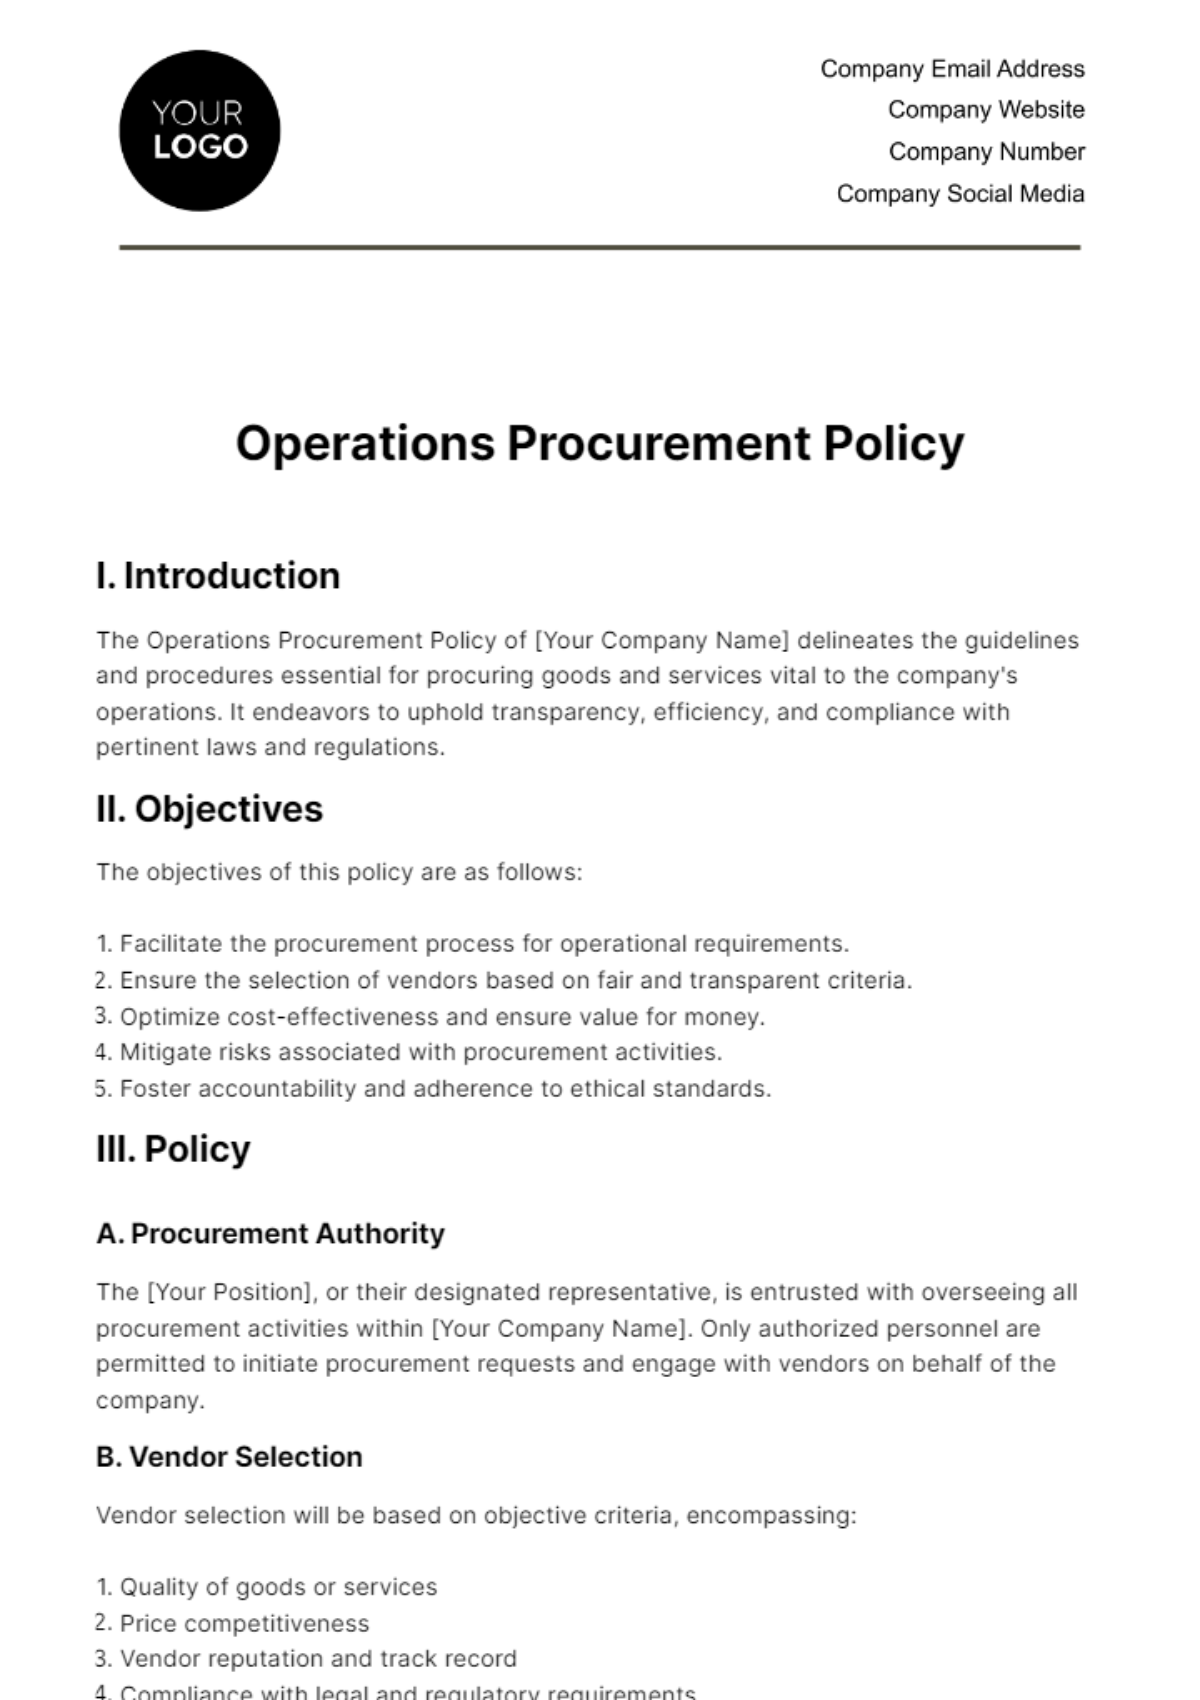 Operations Procurement Policy Template